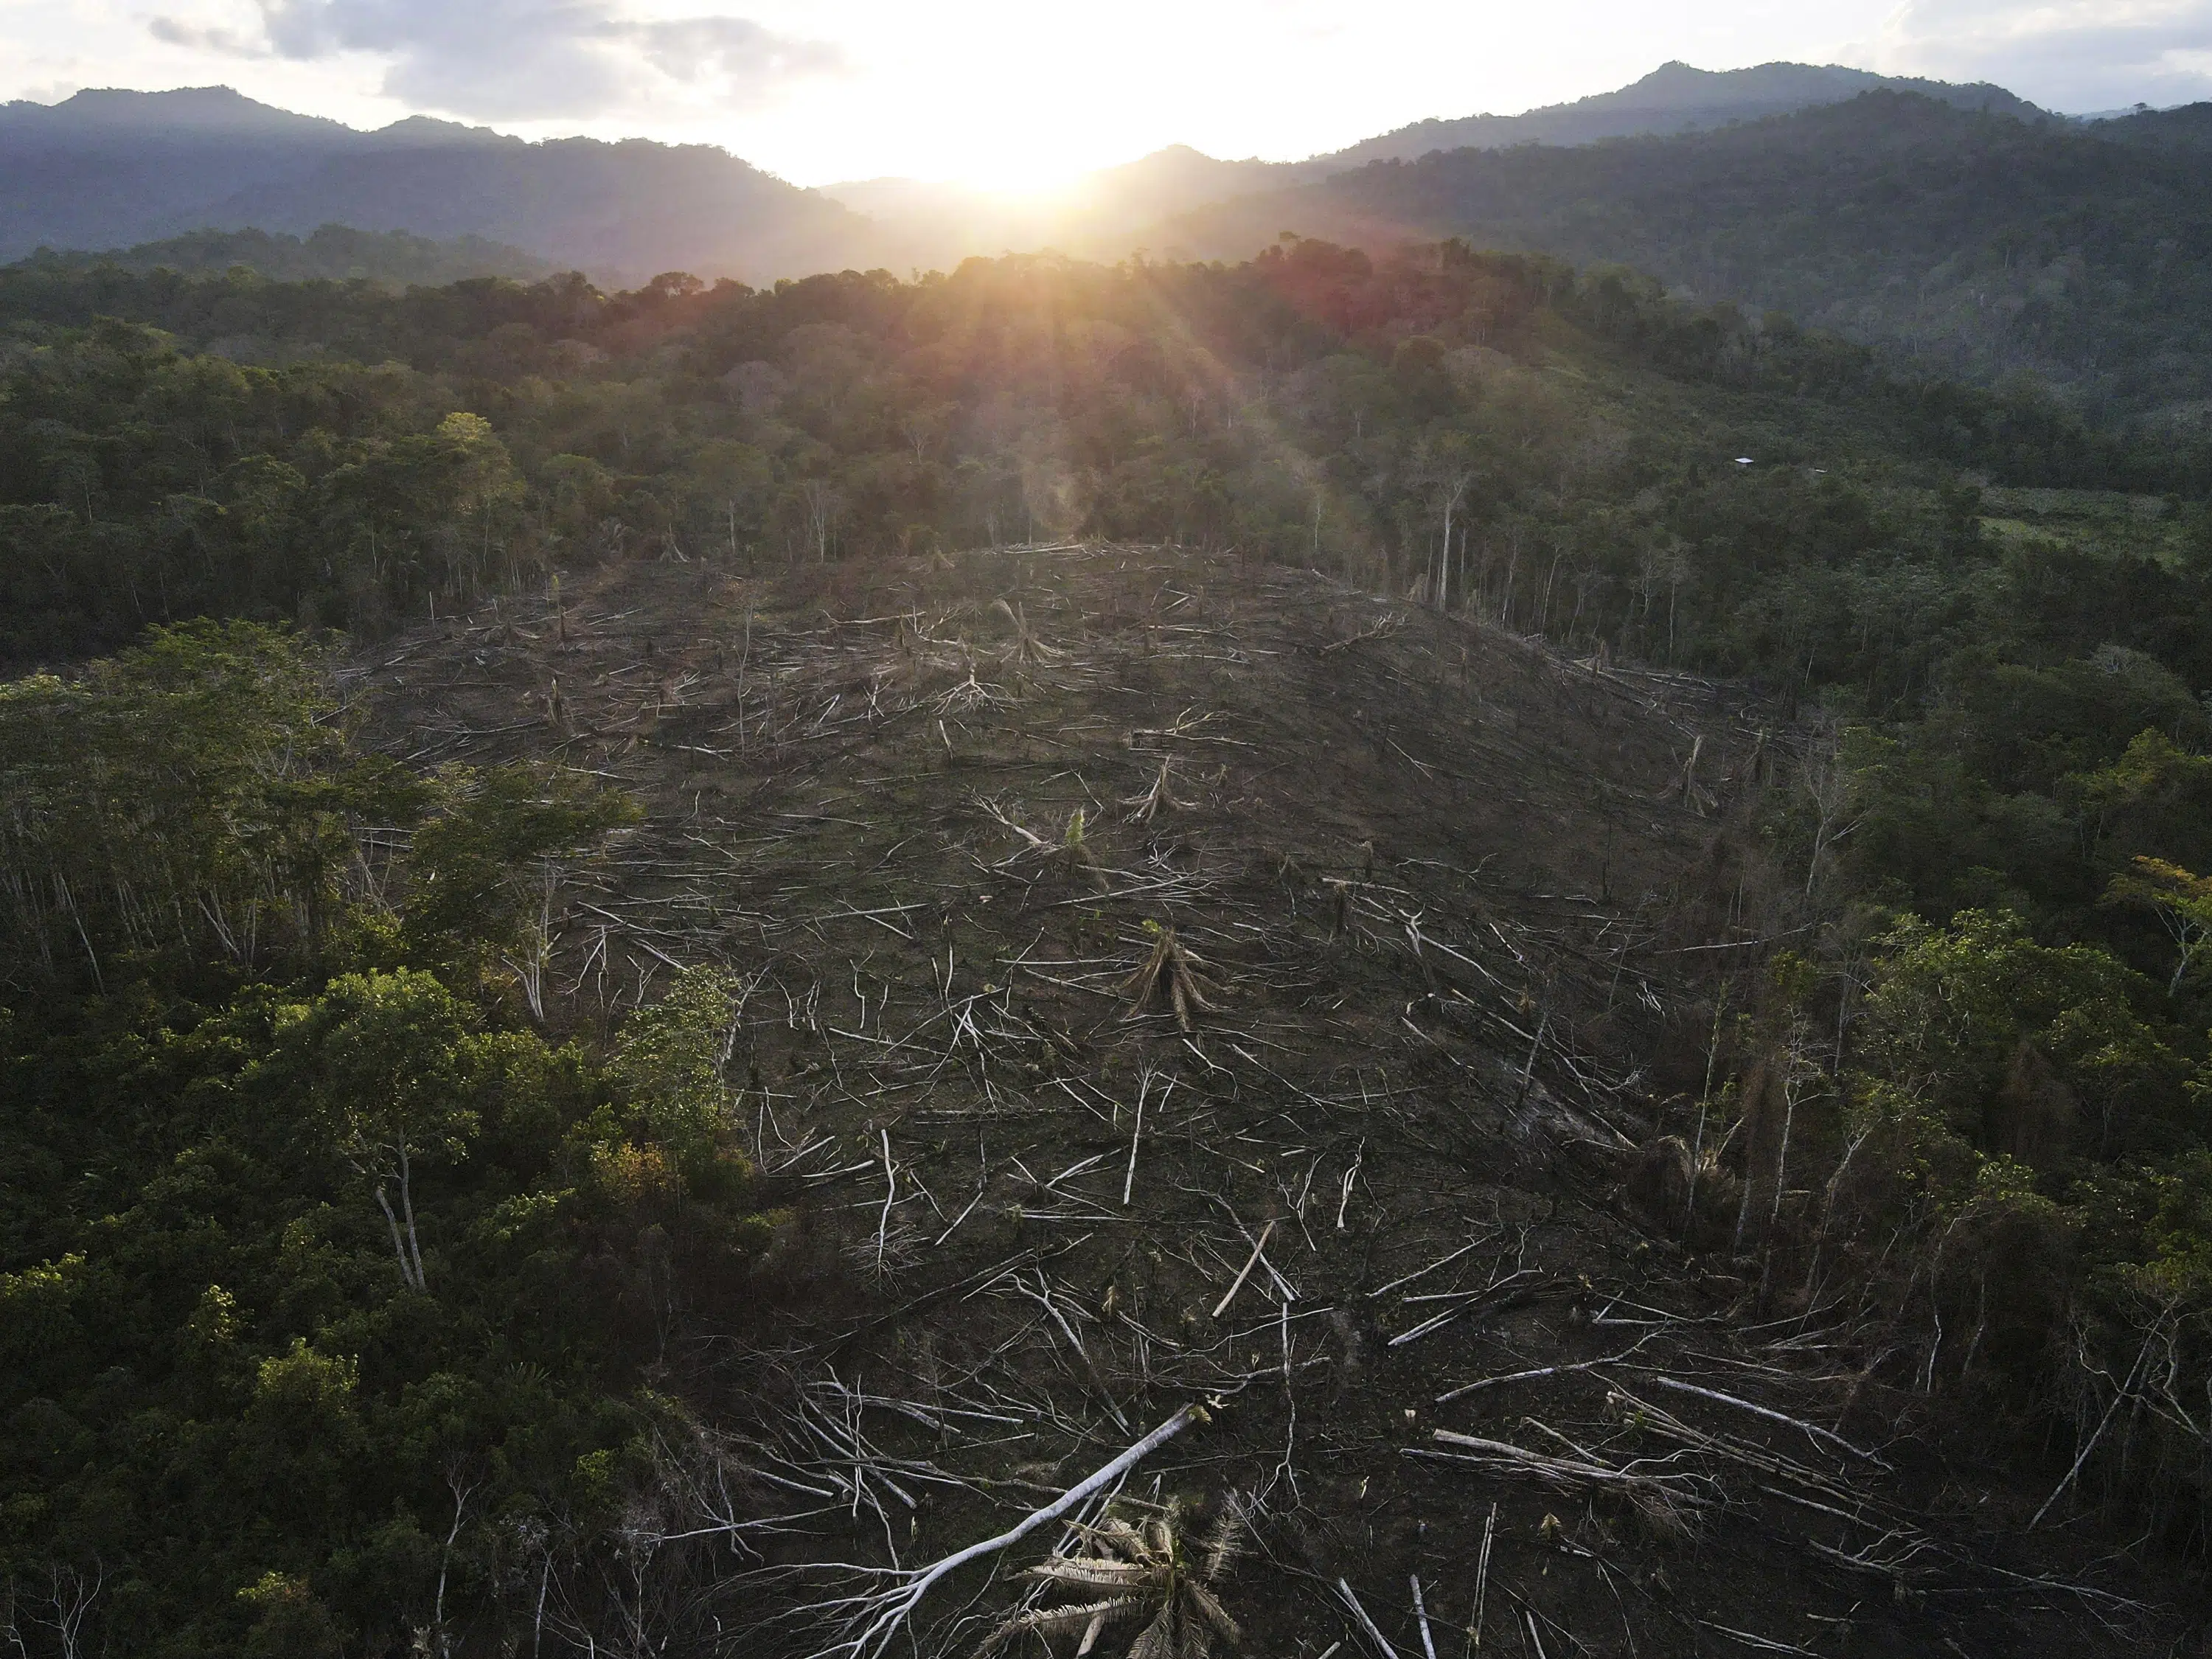 Watch ‘Gone wrong’: Doubts on carbon-credit program in Peru forest – US Latest News